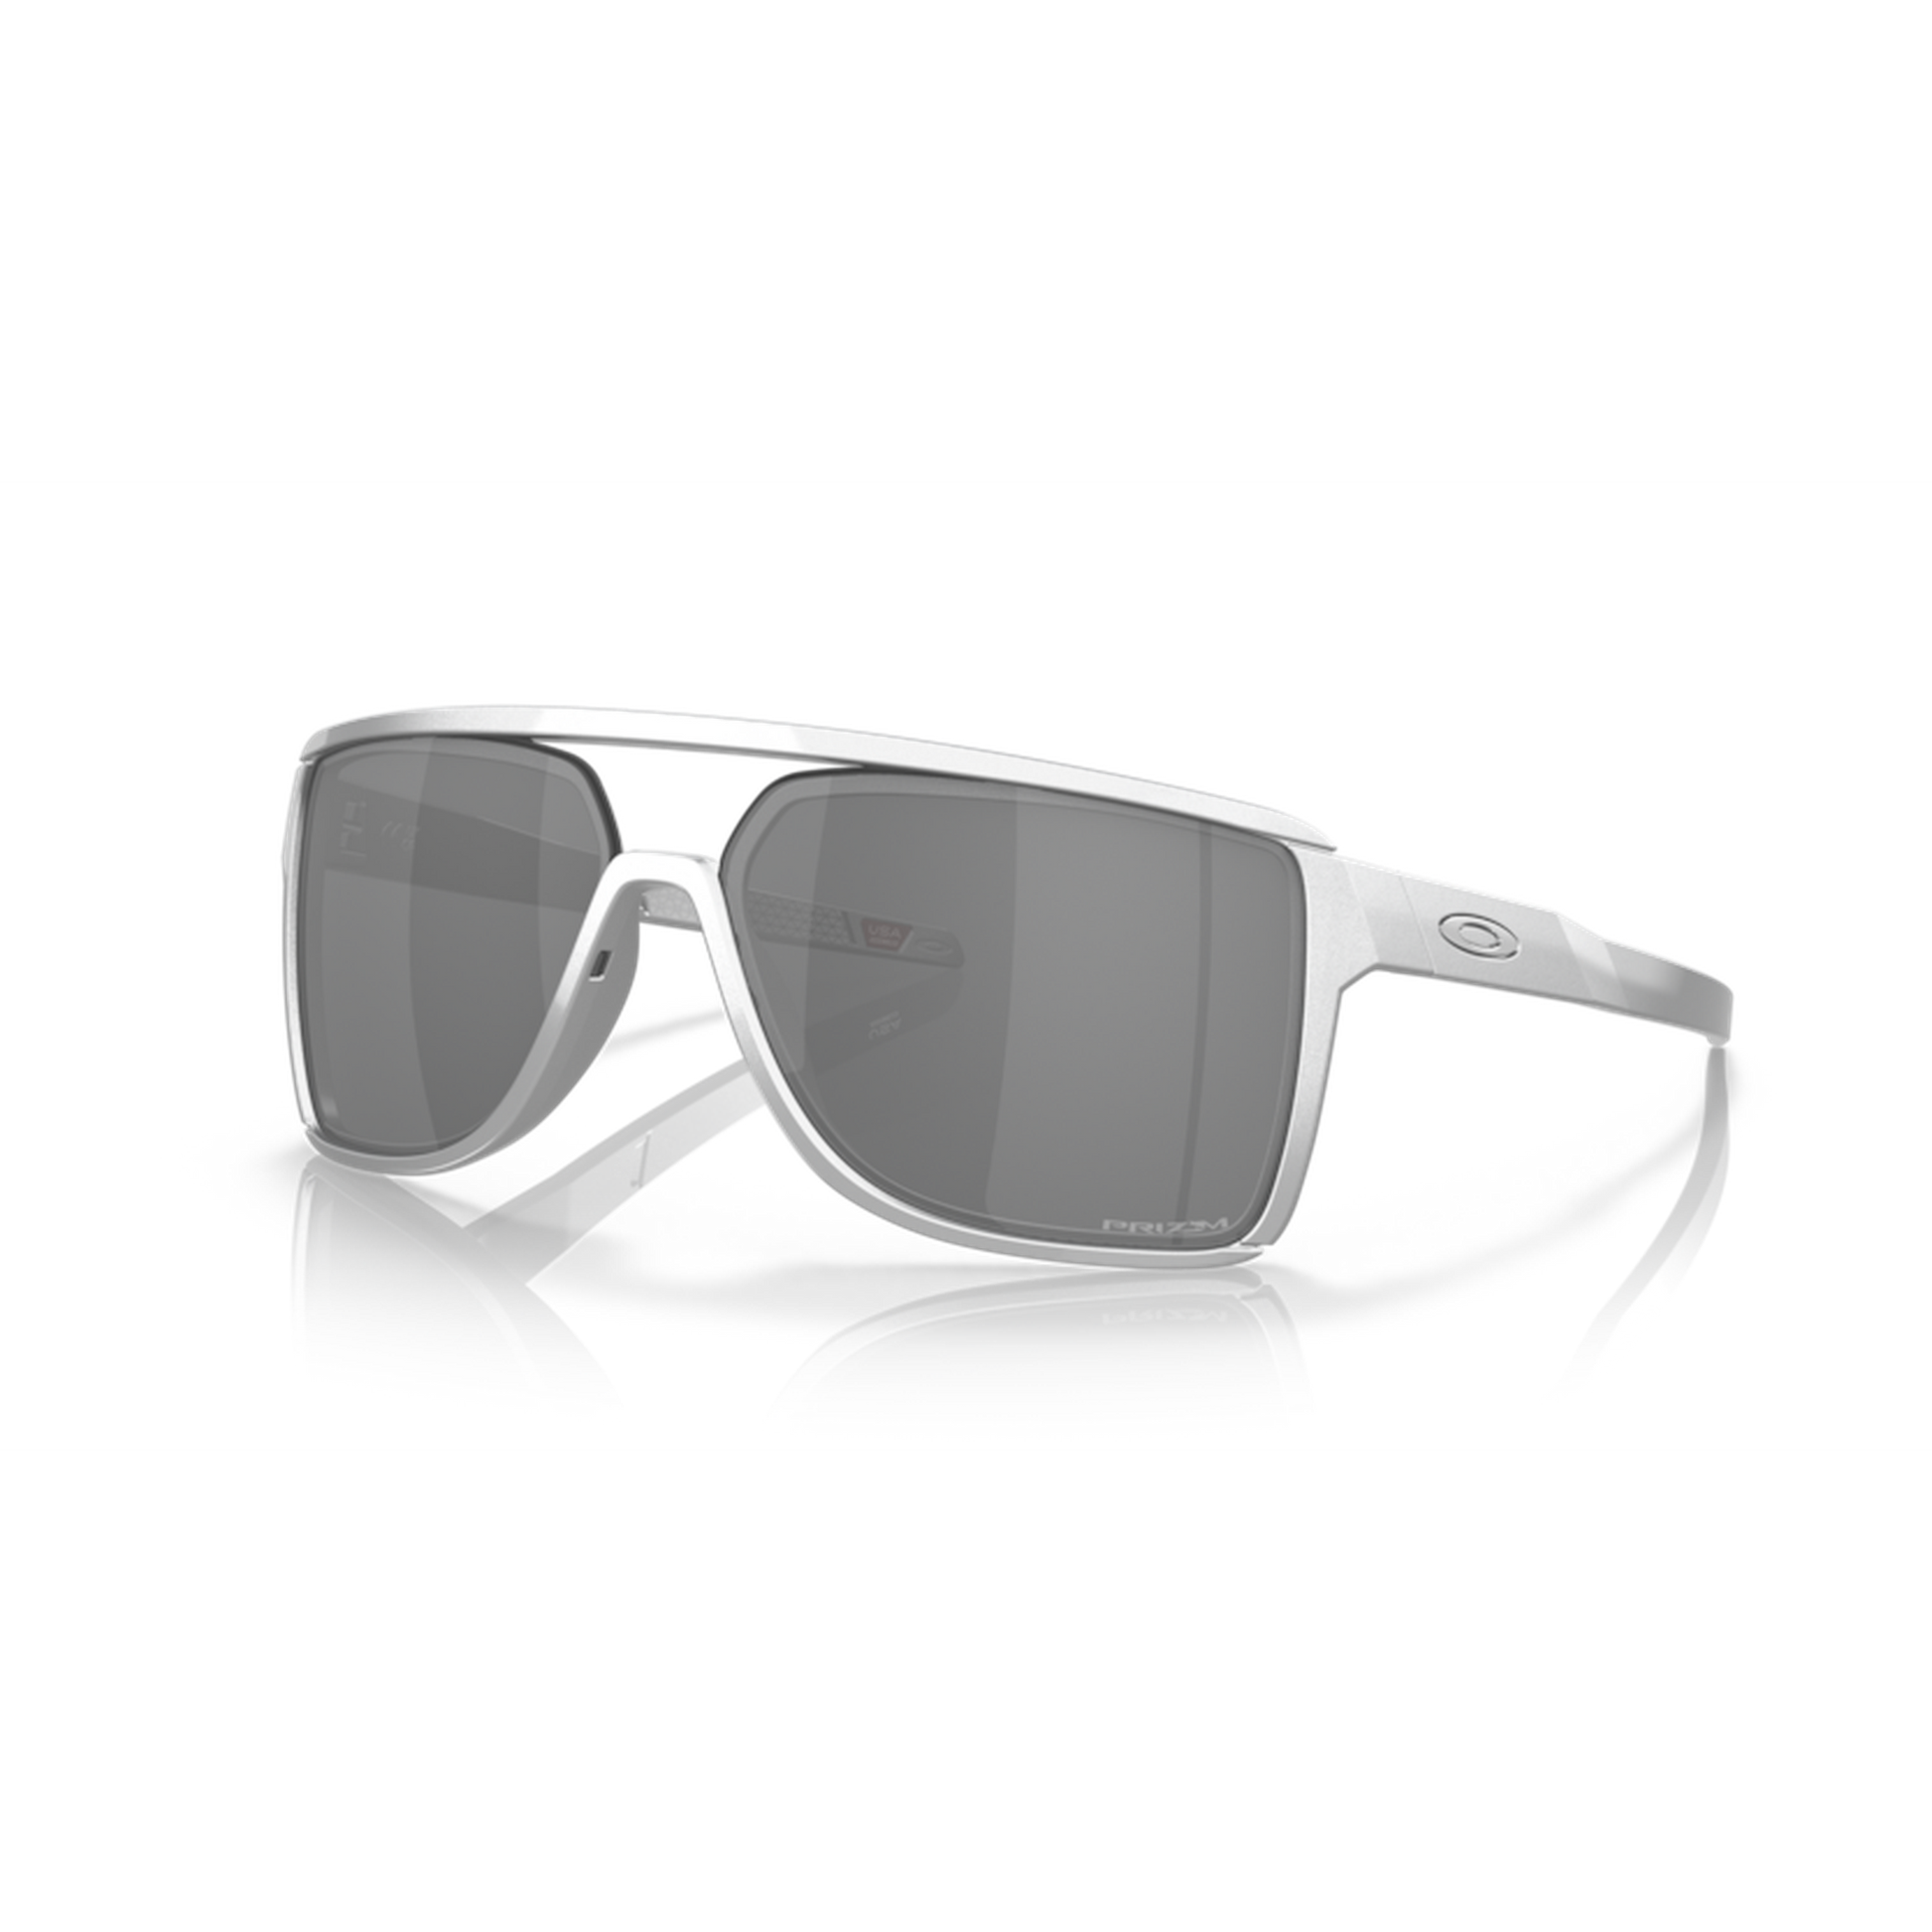 Oakley Castel | Complete Cyclist - Oakley® revisits the high wrap frame with Castel, a shield design sunglass with a more relaxed silhouette than its predecessors. Castel features an O-Matter™ frame, which provides lightweight durability, as well a three-point fit design for comfort.